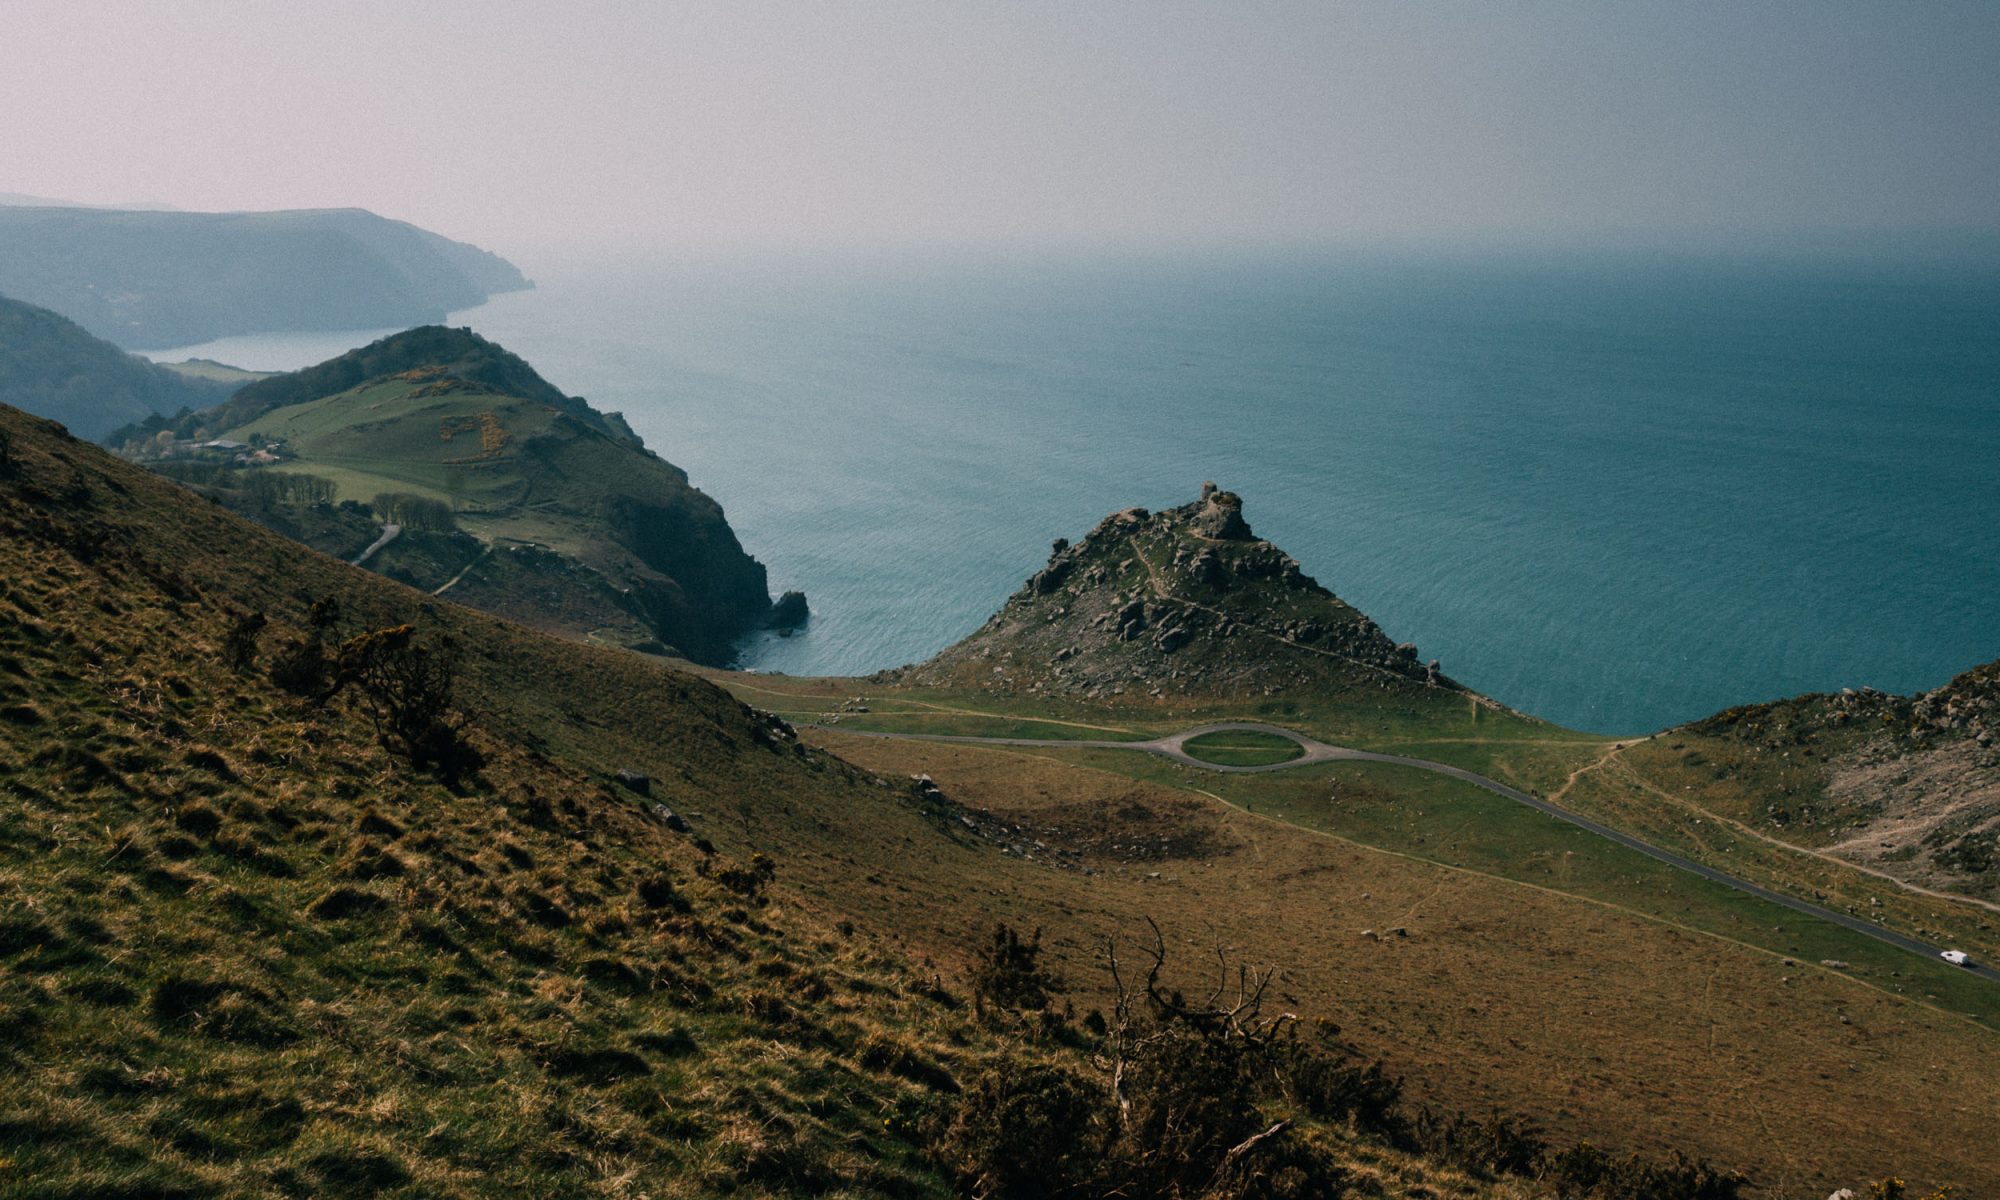 The Valley of the Rocks, Lynton